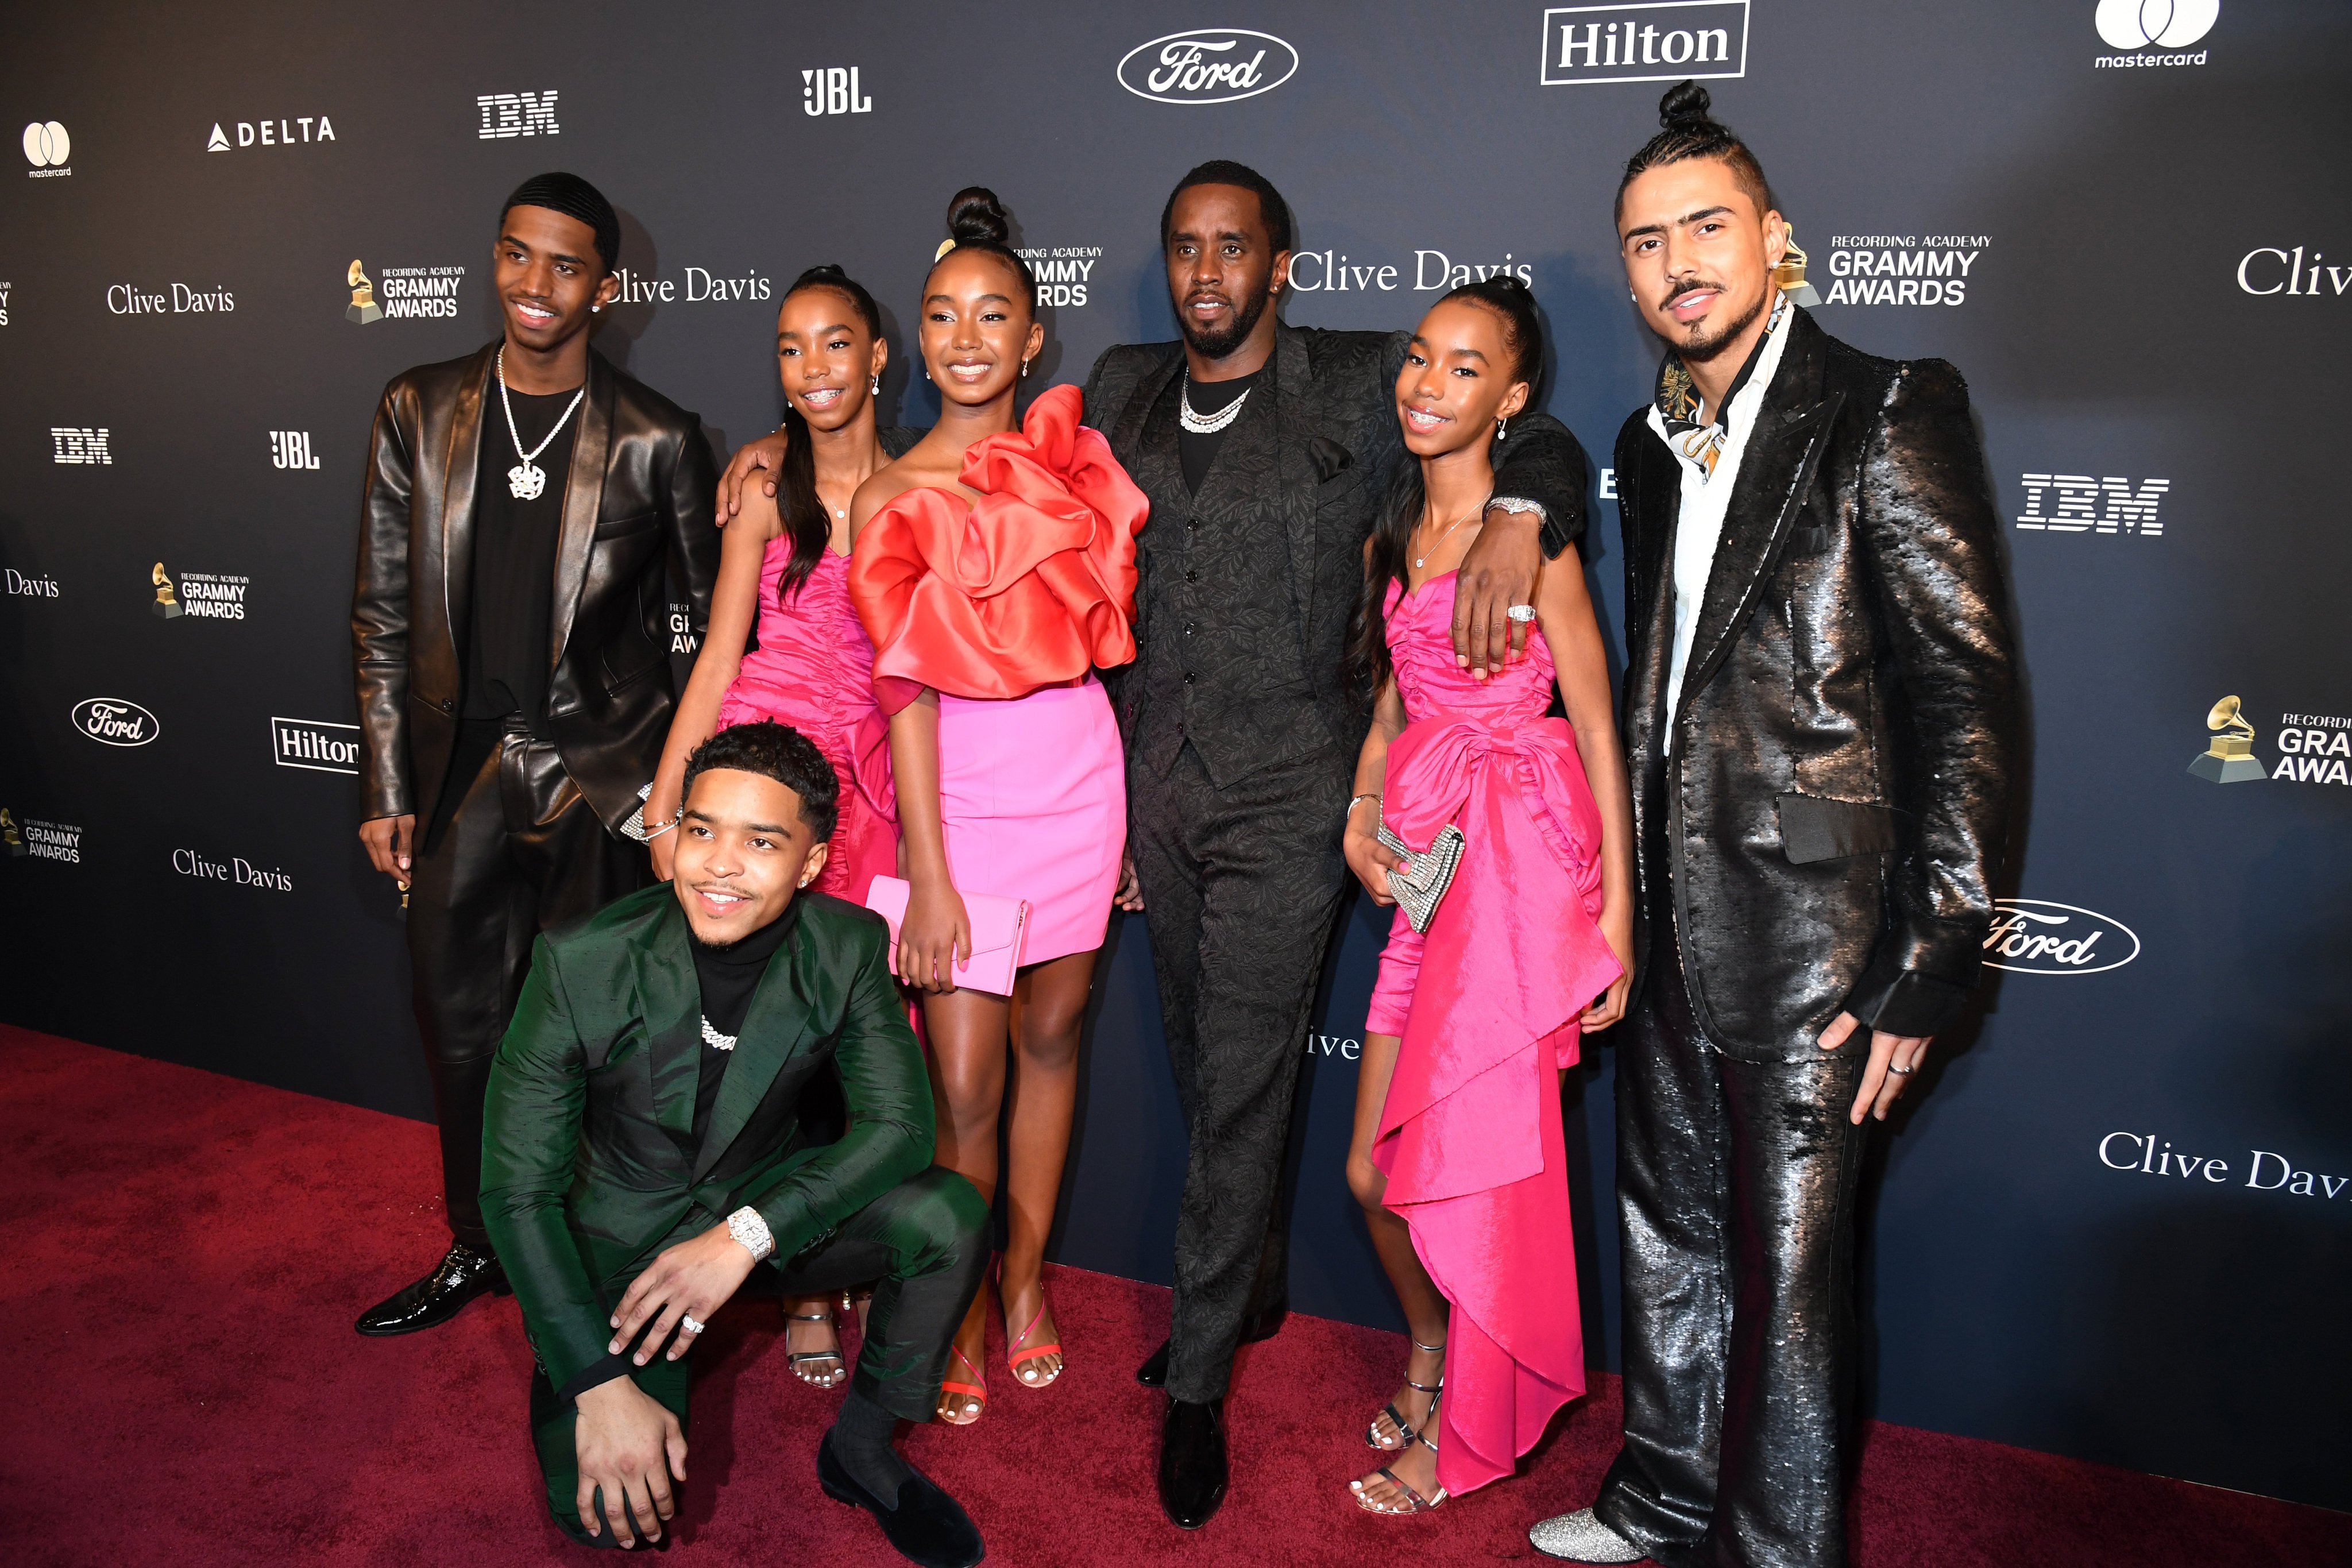 Christian Casey Combs, Jessie James Combs, Justin Dior Combs, Chance Combs, Sean Combs, D’Lila Star Combs, and Quincy Taylor Brown at the Grammys together, in 2020. Photo: Getty Images